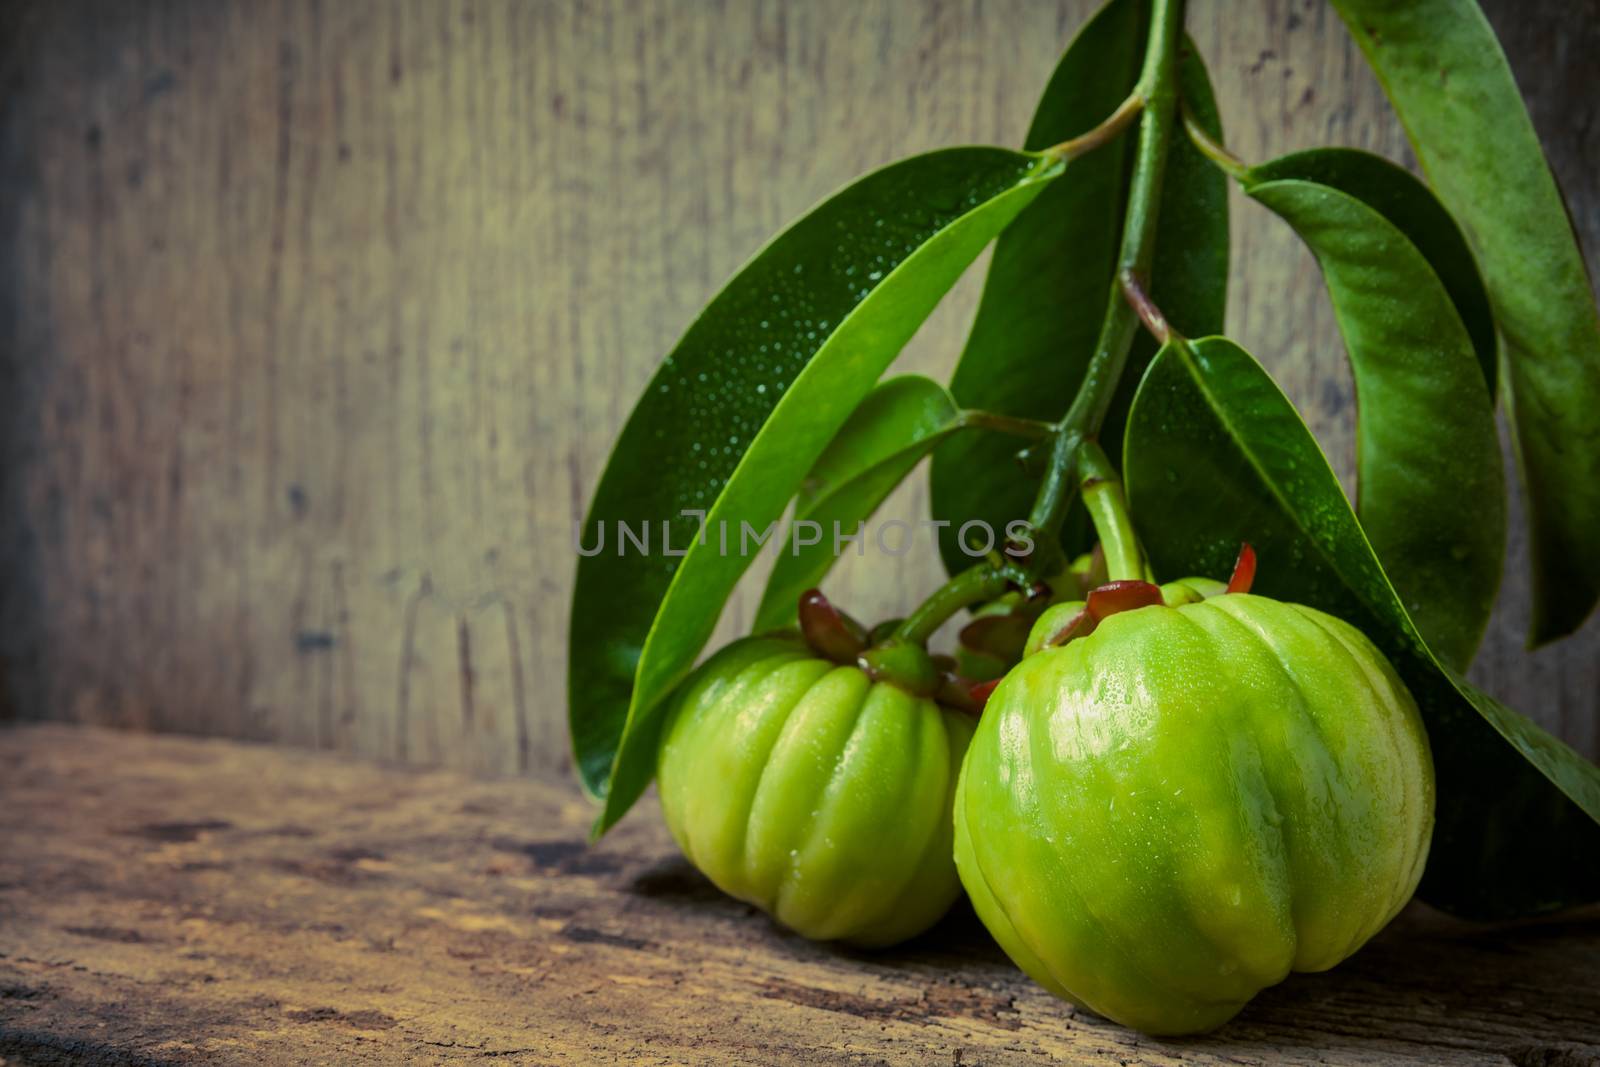 Still life garcinia atroviridis fresh fruit on old wood background. Thai herb and sour flavor lots of vitamin C. Low key picture style. Water drops on leafs. Extract as a weight loss product